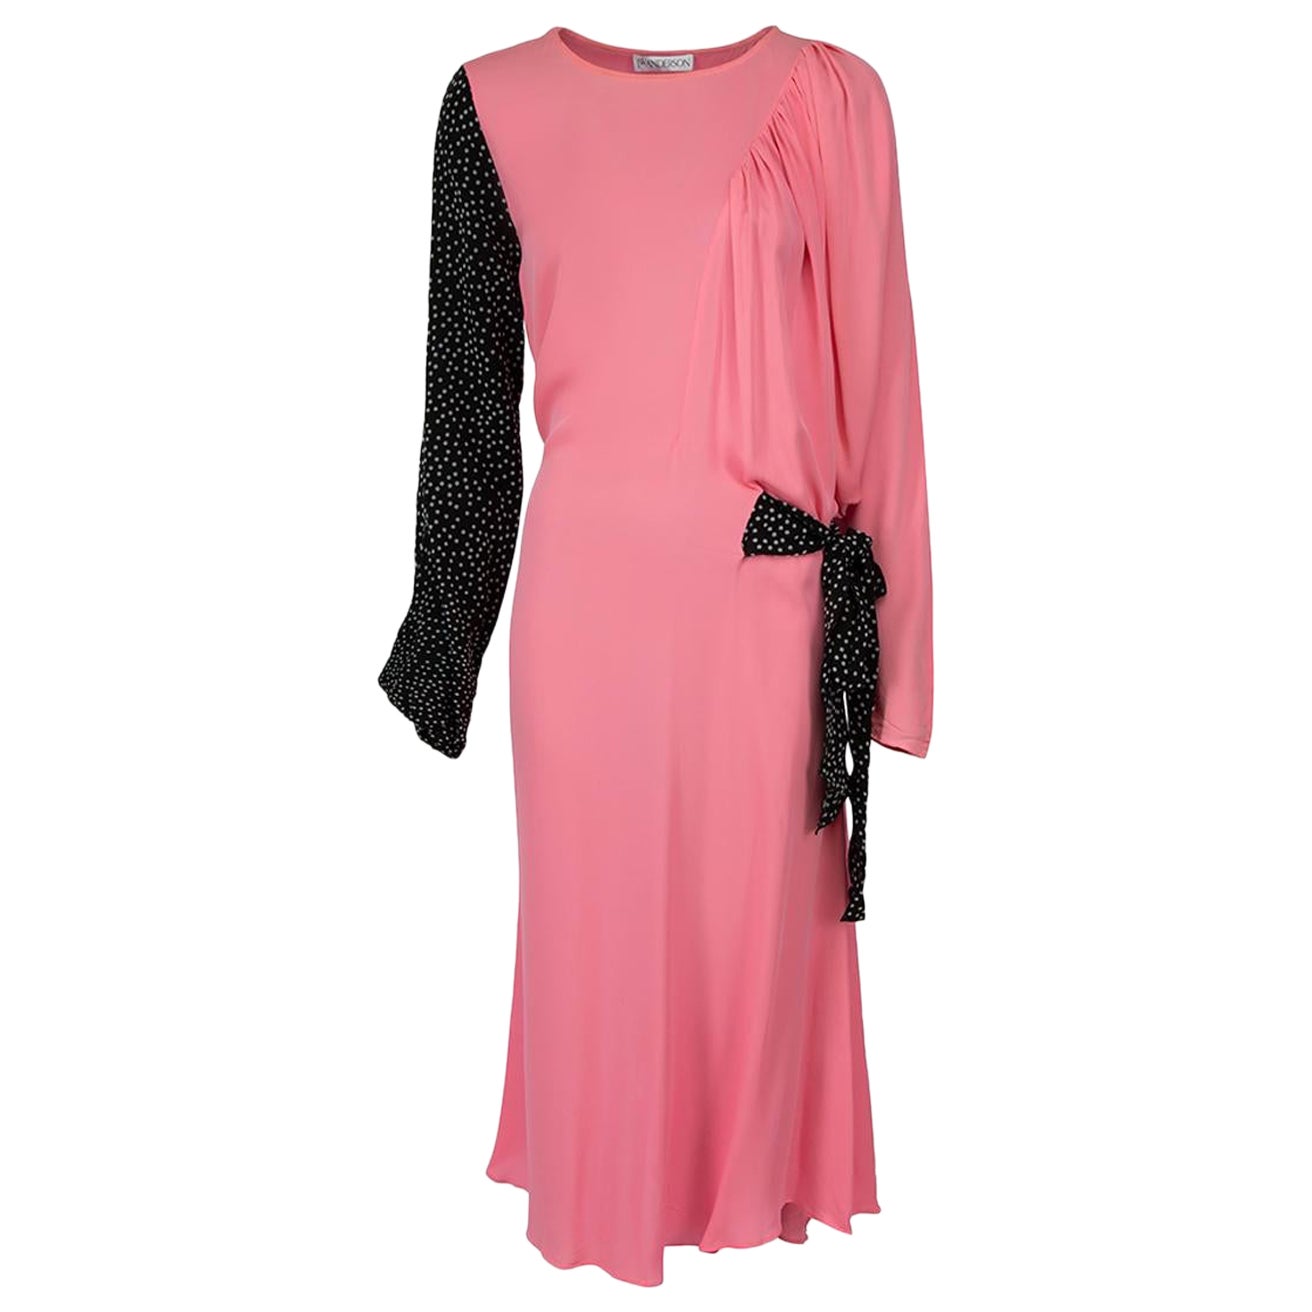 J.W.Anderson Pink Silk Contrast Sleeve Dress Size M For Sale